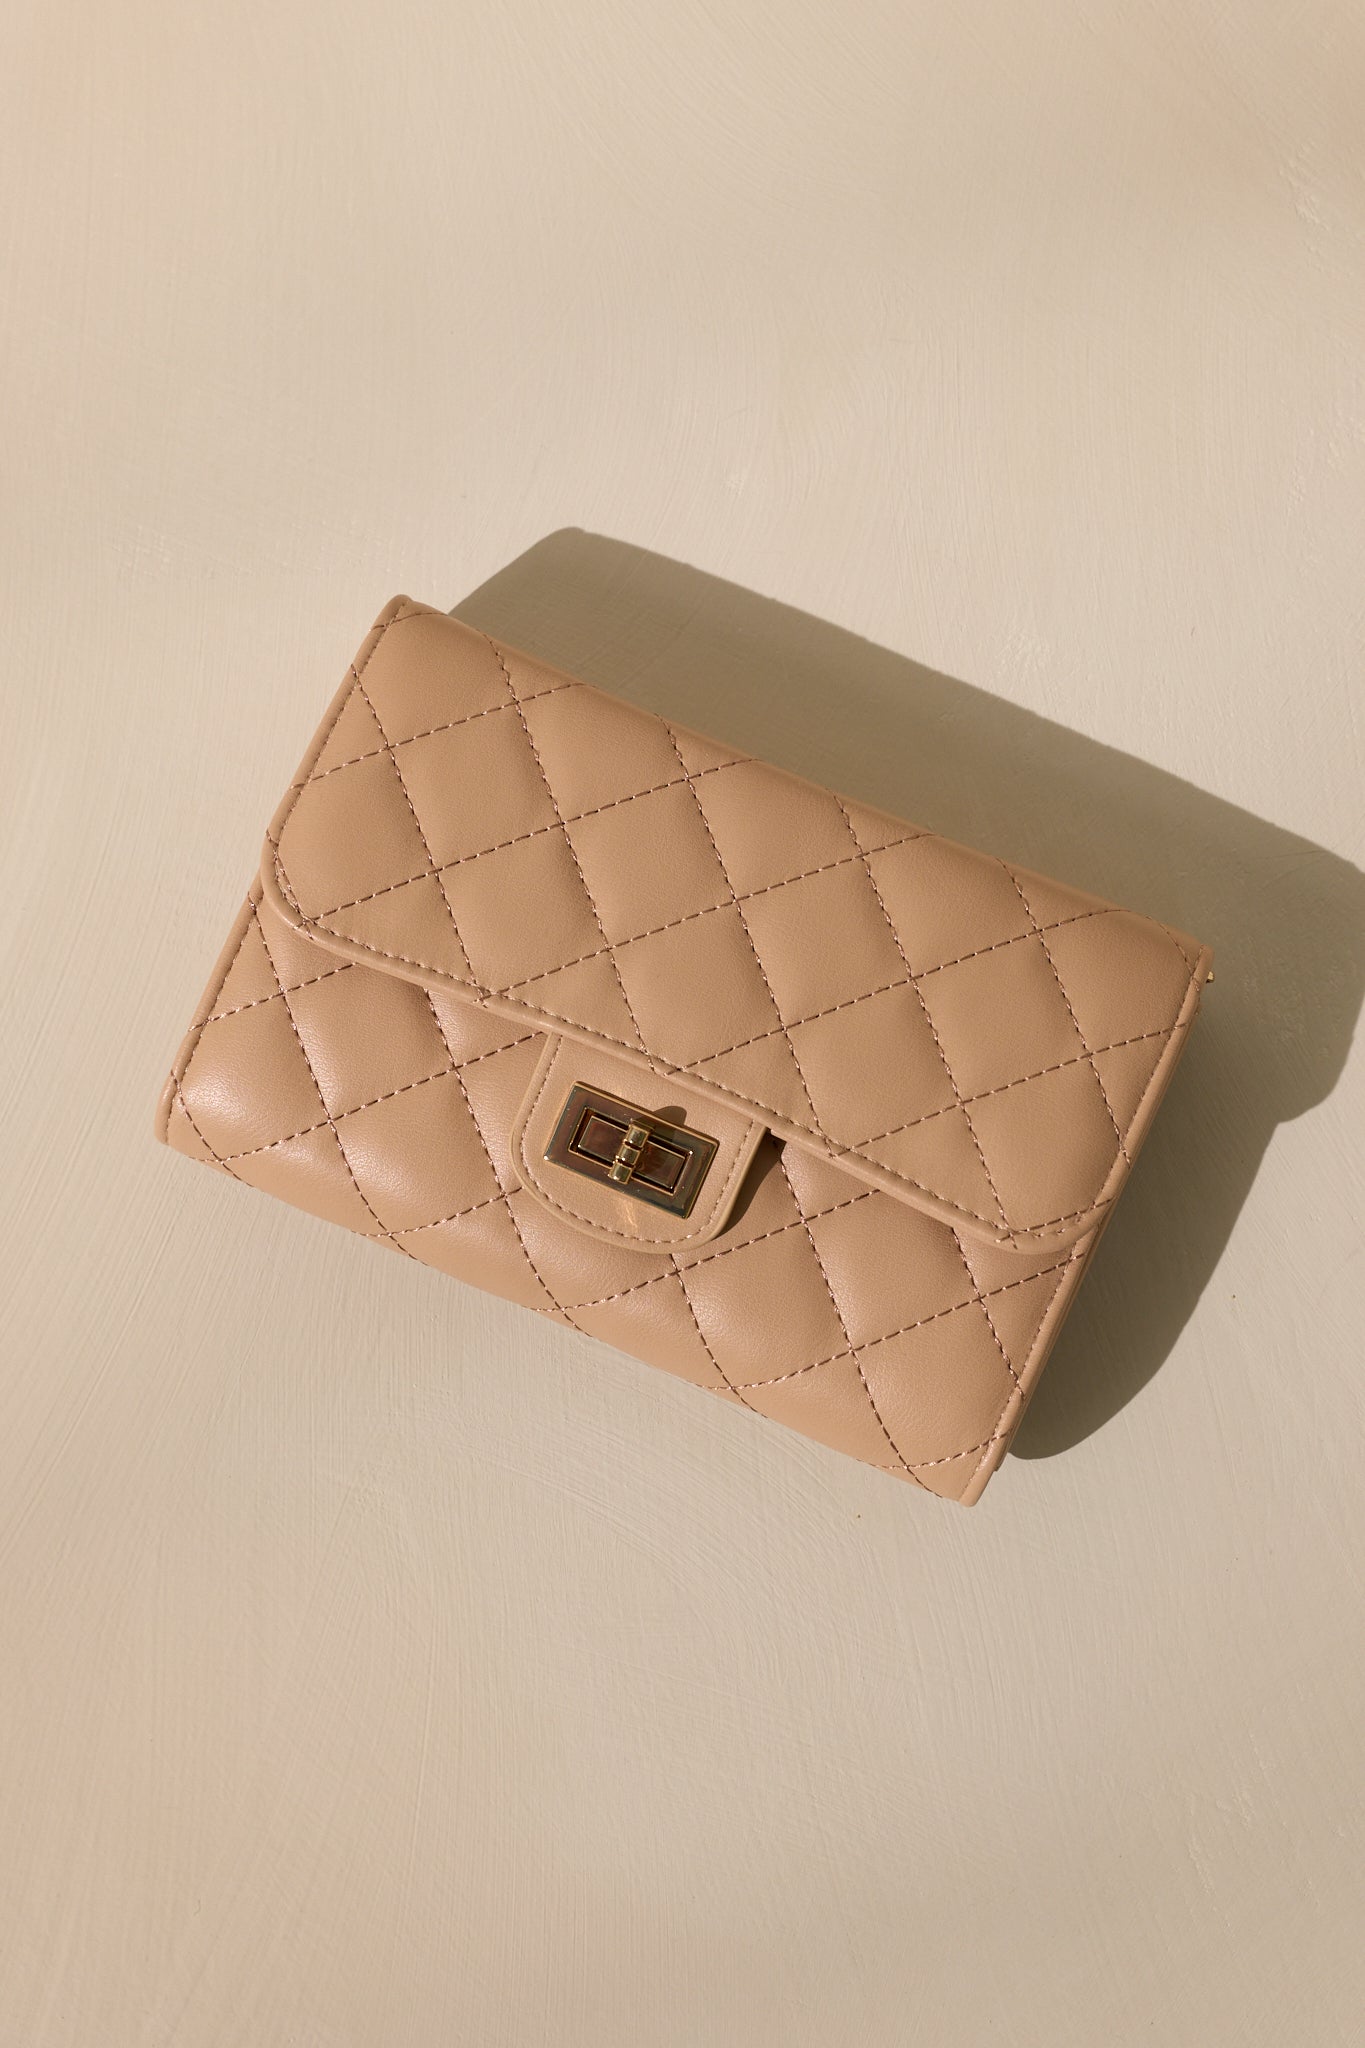 Overhead view of a beige quilted clutch bag with a front turn-lock closure.